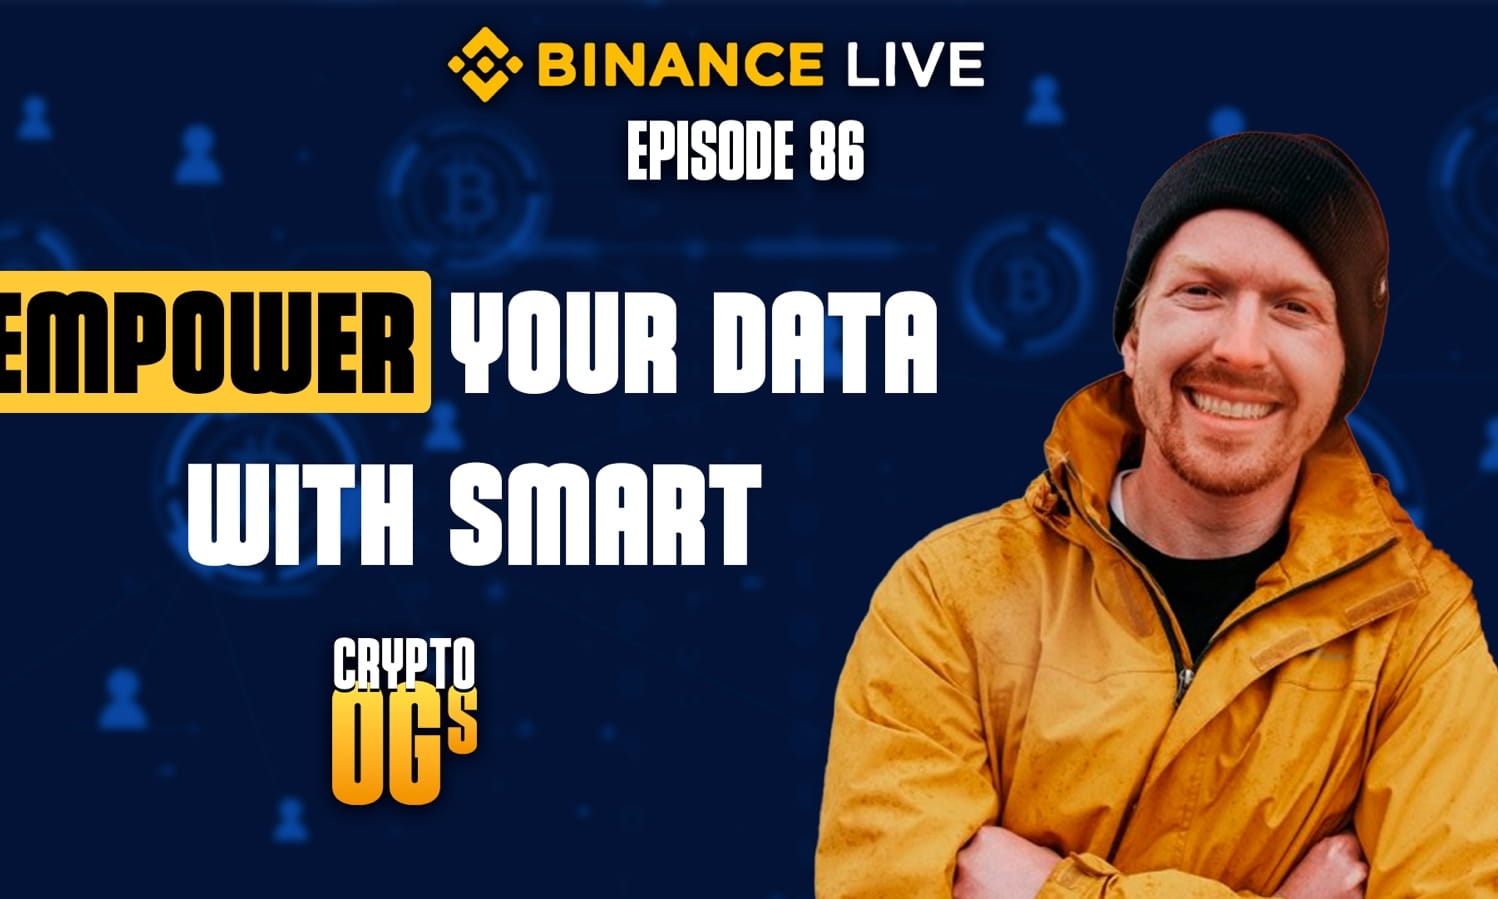 Crypto OGs featuring Thomas Crowley | SMART | Episode 86